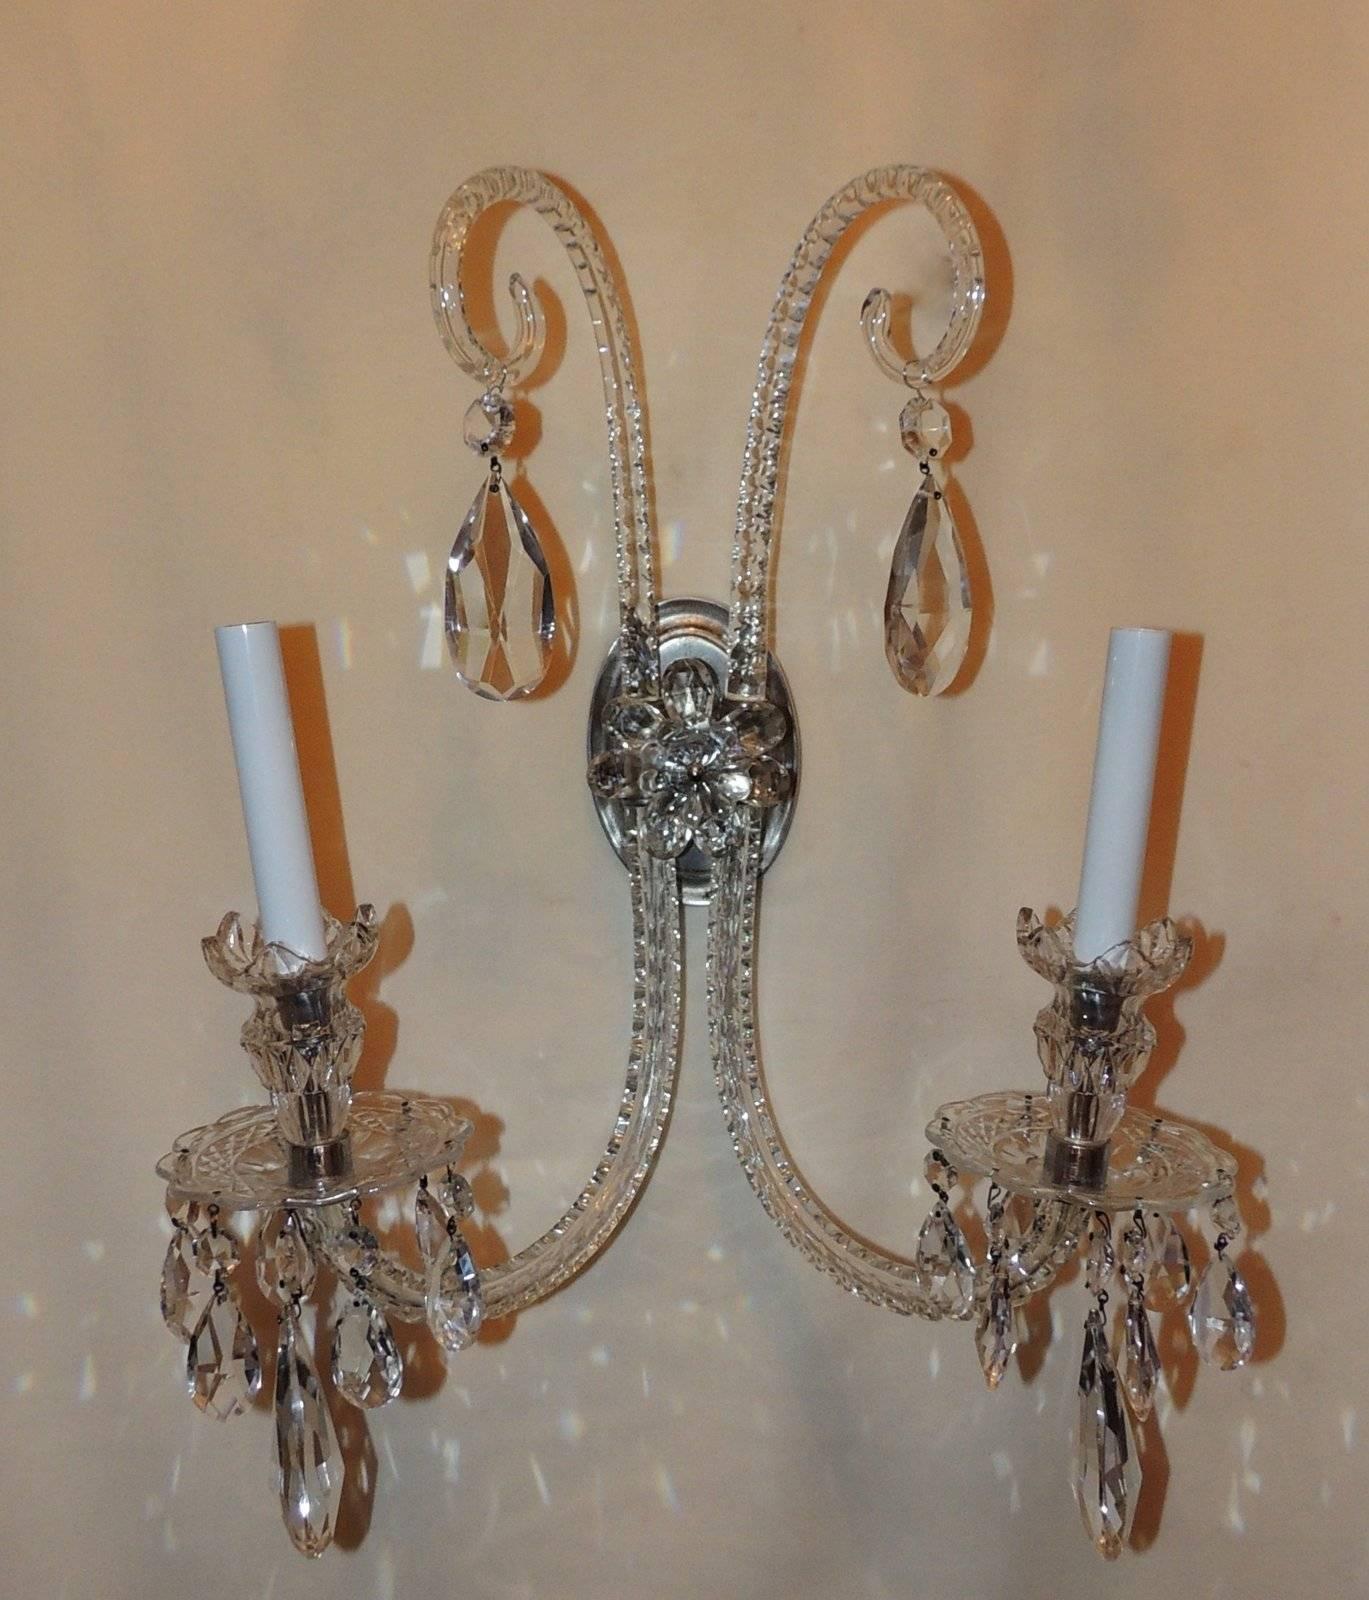 An elegant pair of Georgian style English sconces with beautiful cut crystal and faceted arms and prism drops and a silvered bronze center medallion and finished with a large cut crystal flower. 
Completely Redone, Ready to Install

Measures: 21